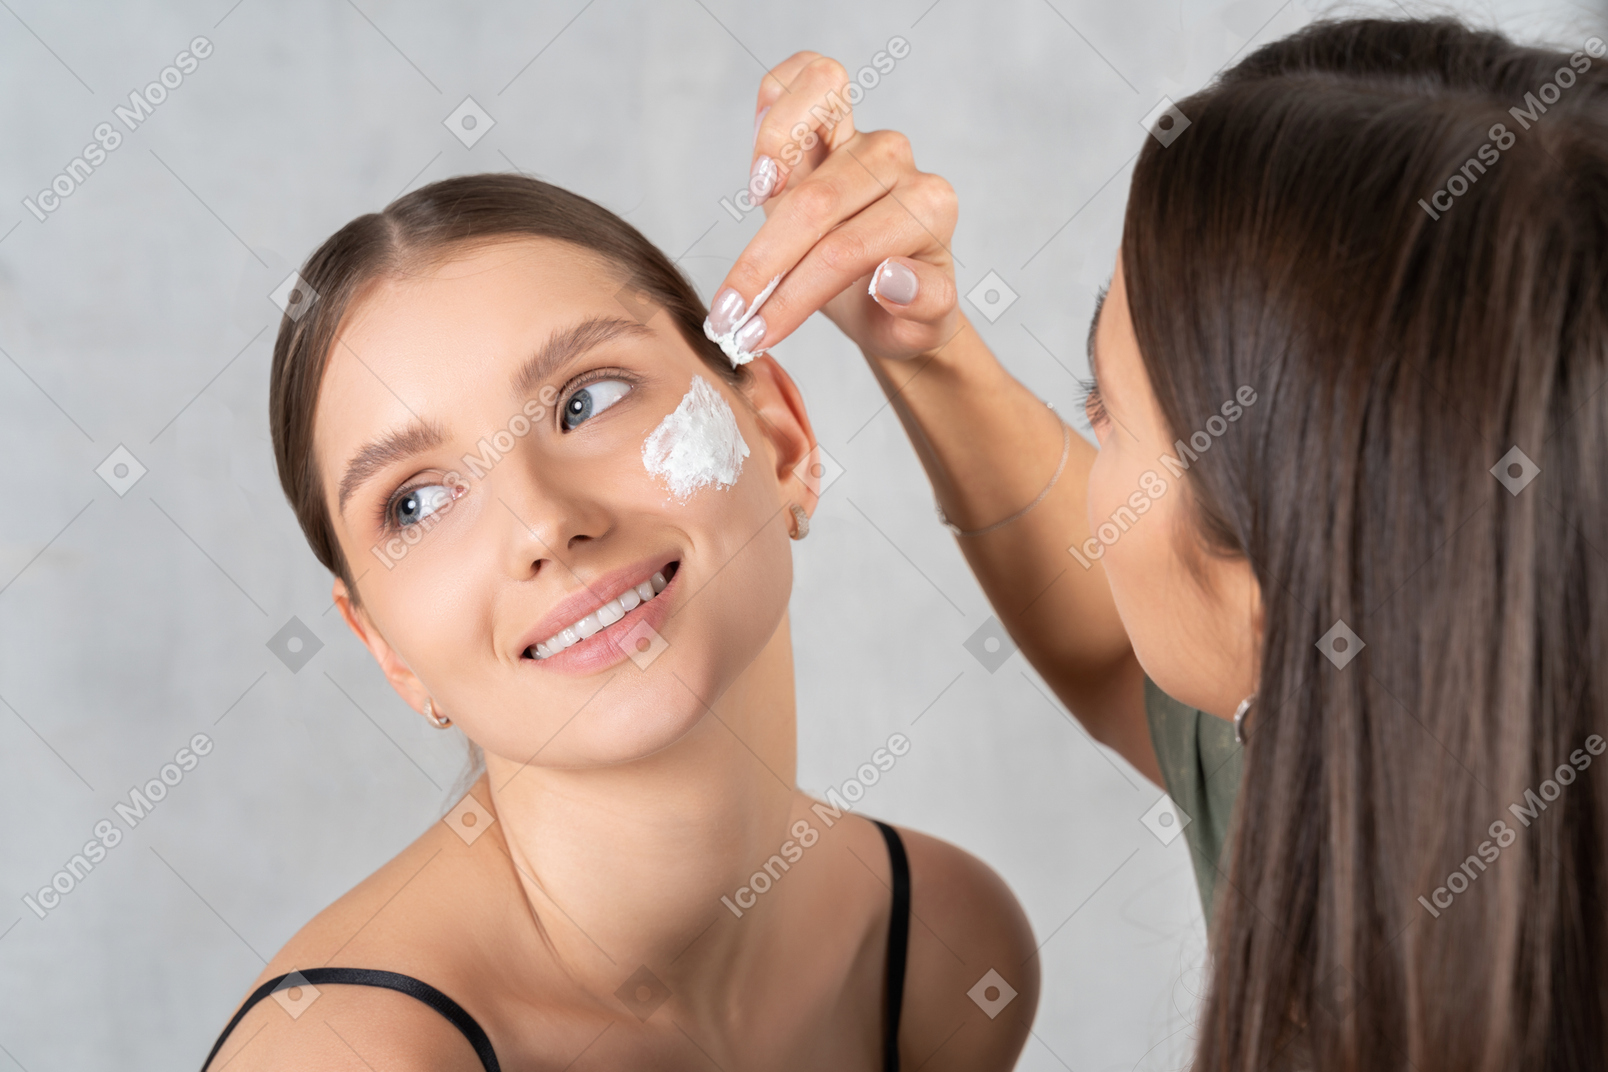 Woman applying cream on another woman's face